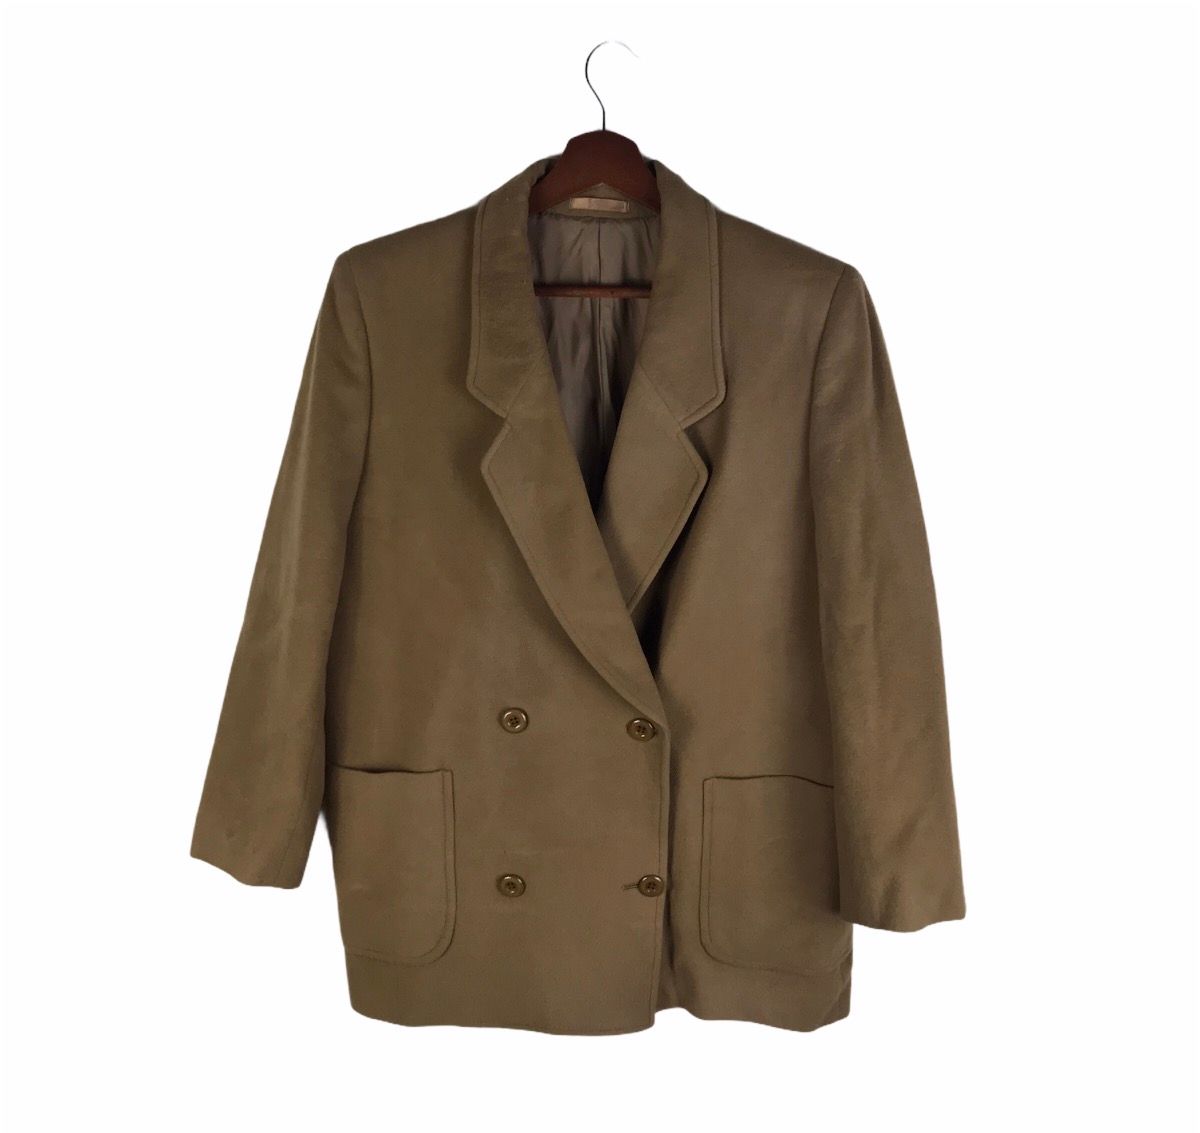 Burberry Double Breasted Wool Peacoat Jacket - 1